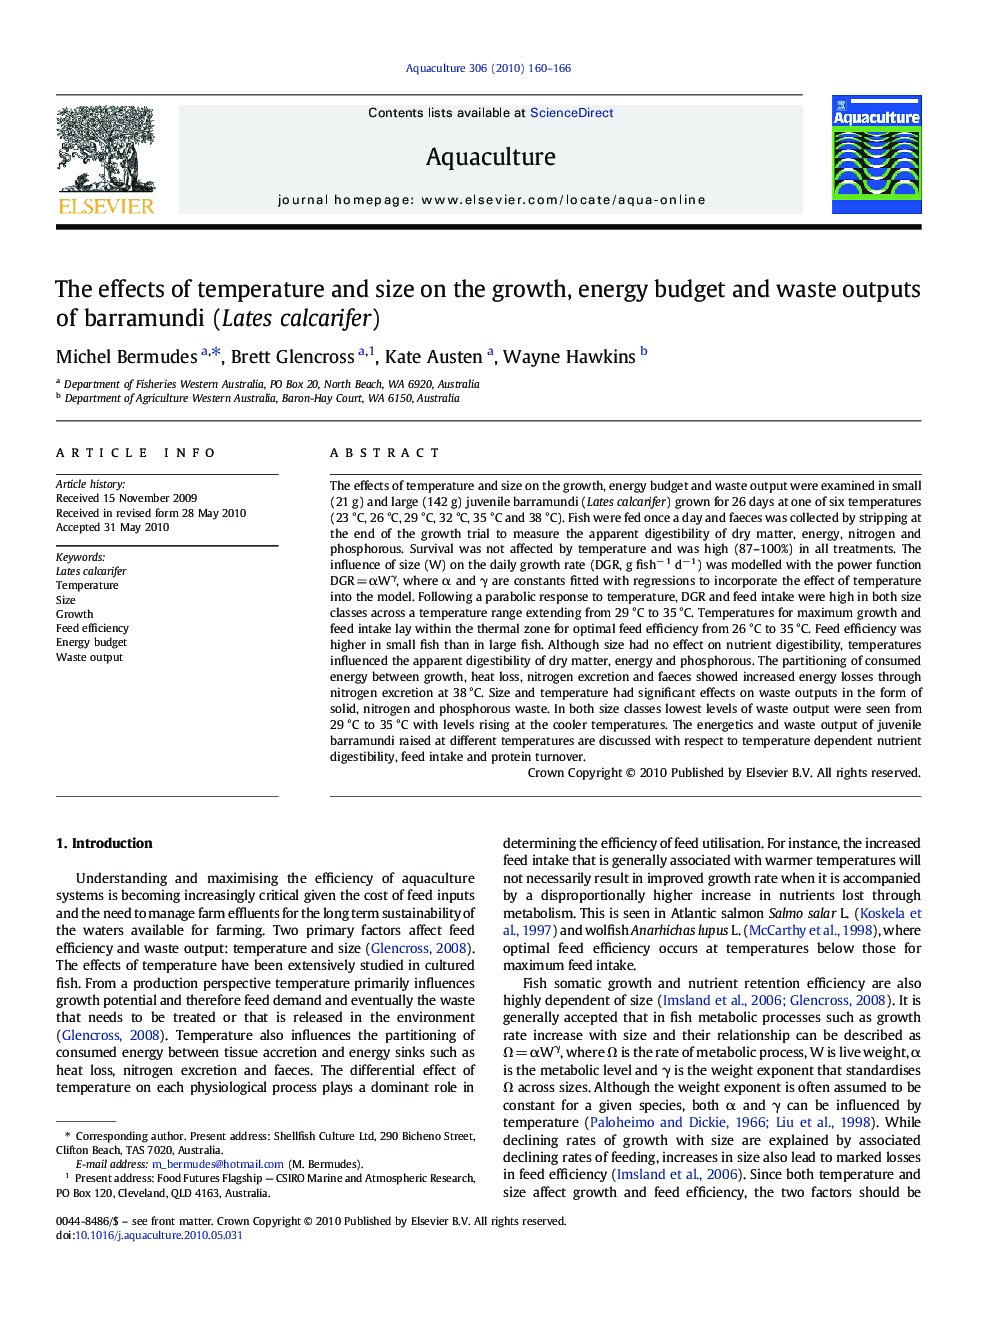 The effects of temperature and size on the growth, energy budget and waste outputs of barramundi (Lates calcarifer)